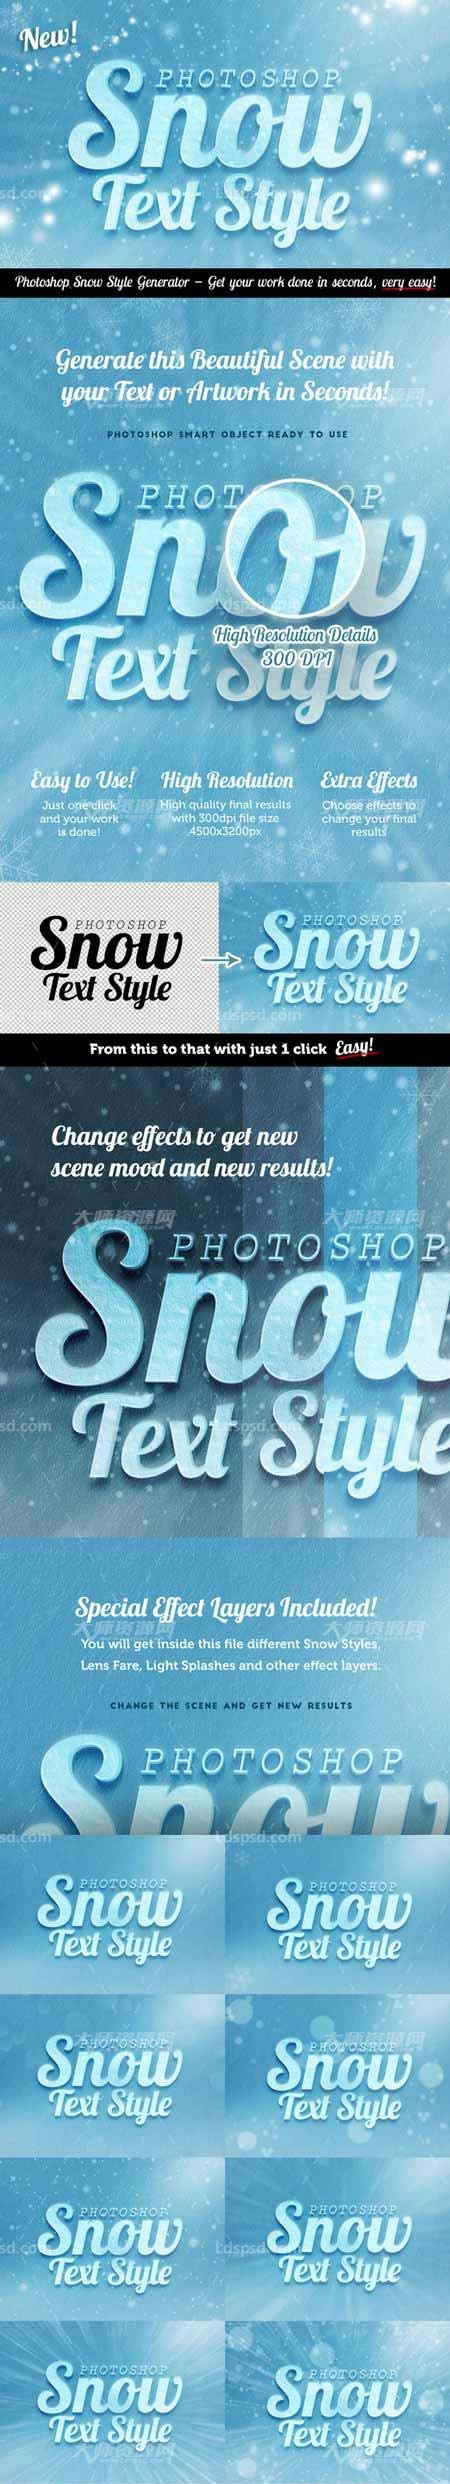 Snow Text Effect Psd for Photoshop,冰雪文字PSD模板